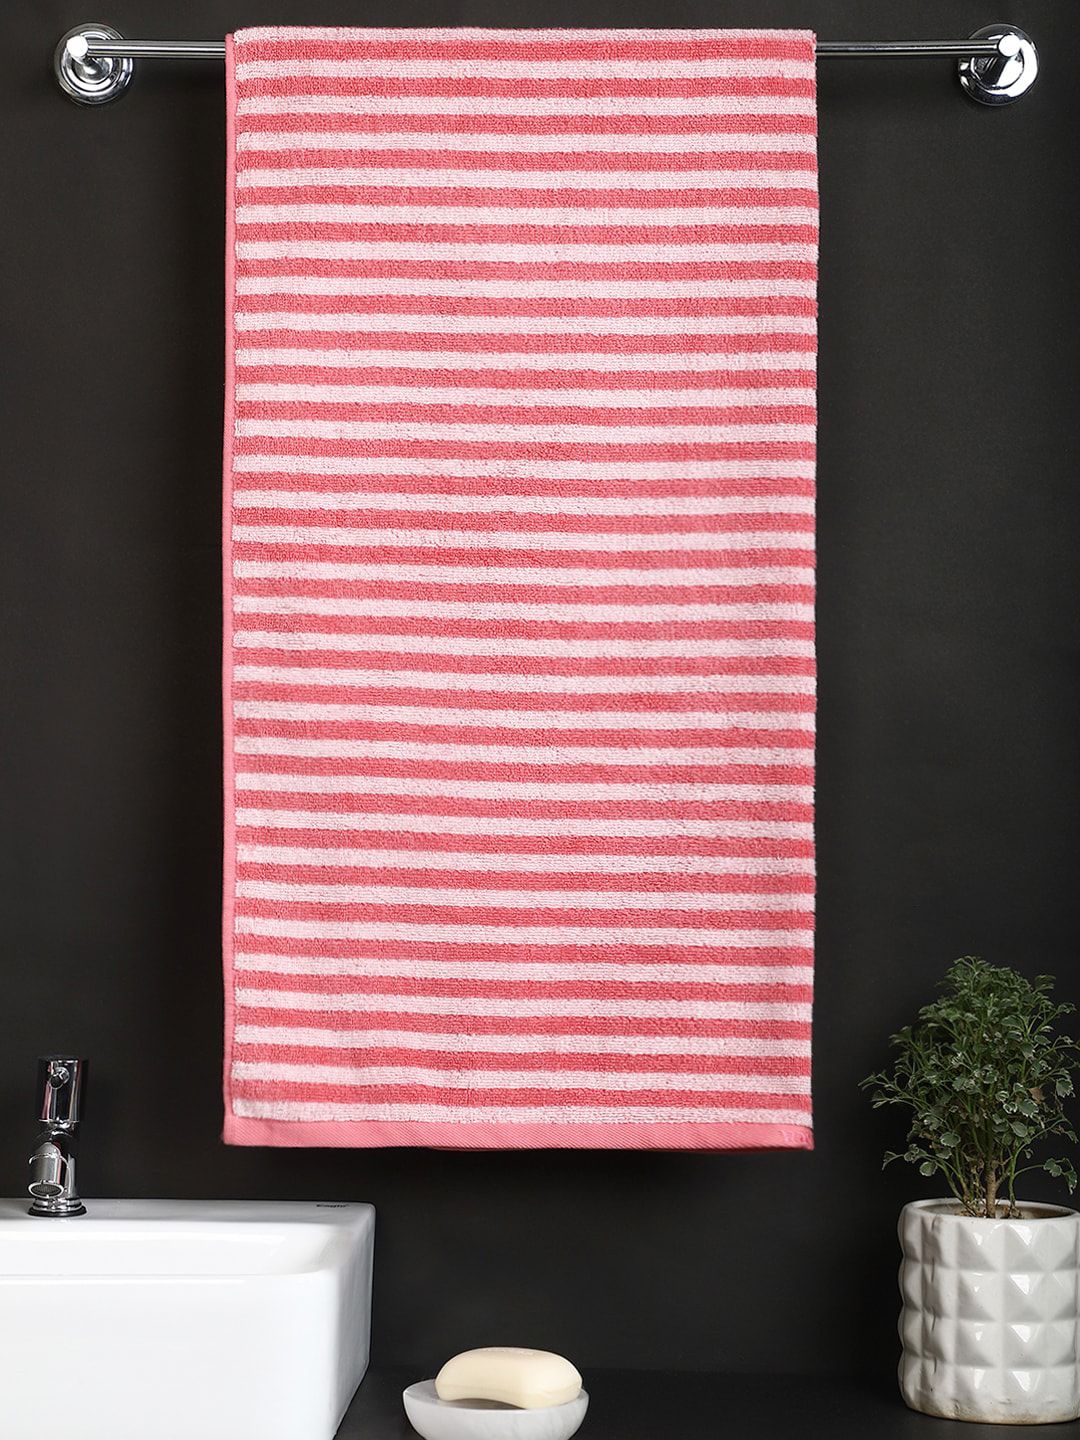 Raymond Home Unisex White & Peach Coloured Striped 500 GSM Cotton Bath Towels Price in India